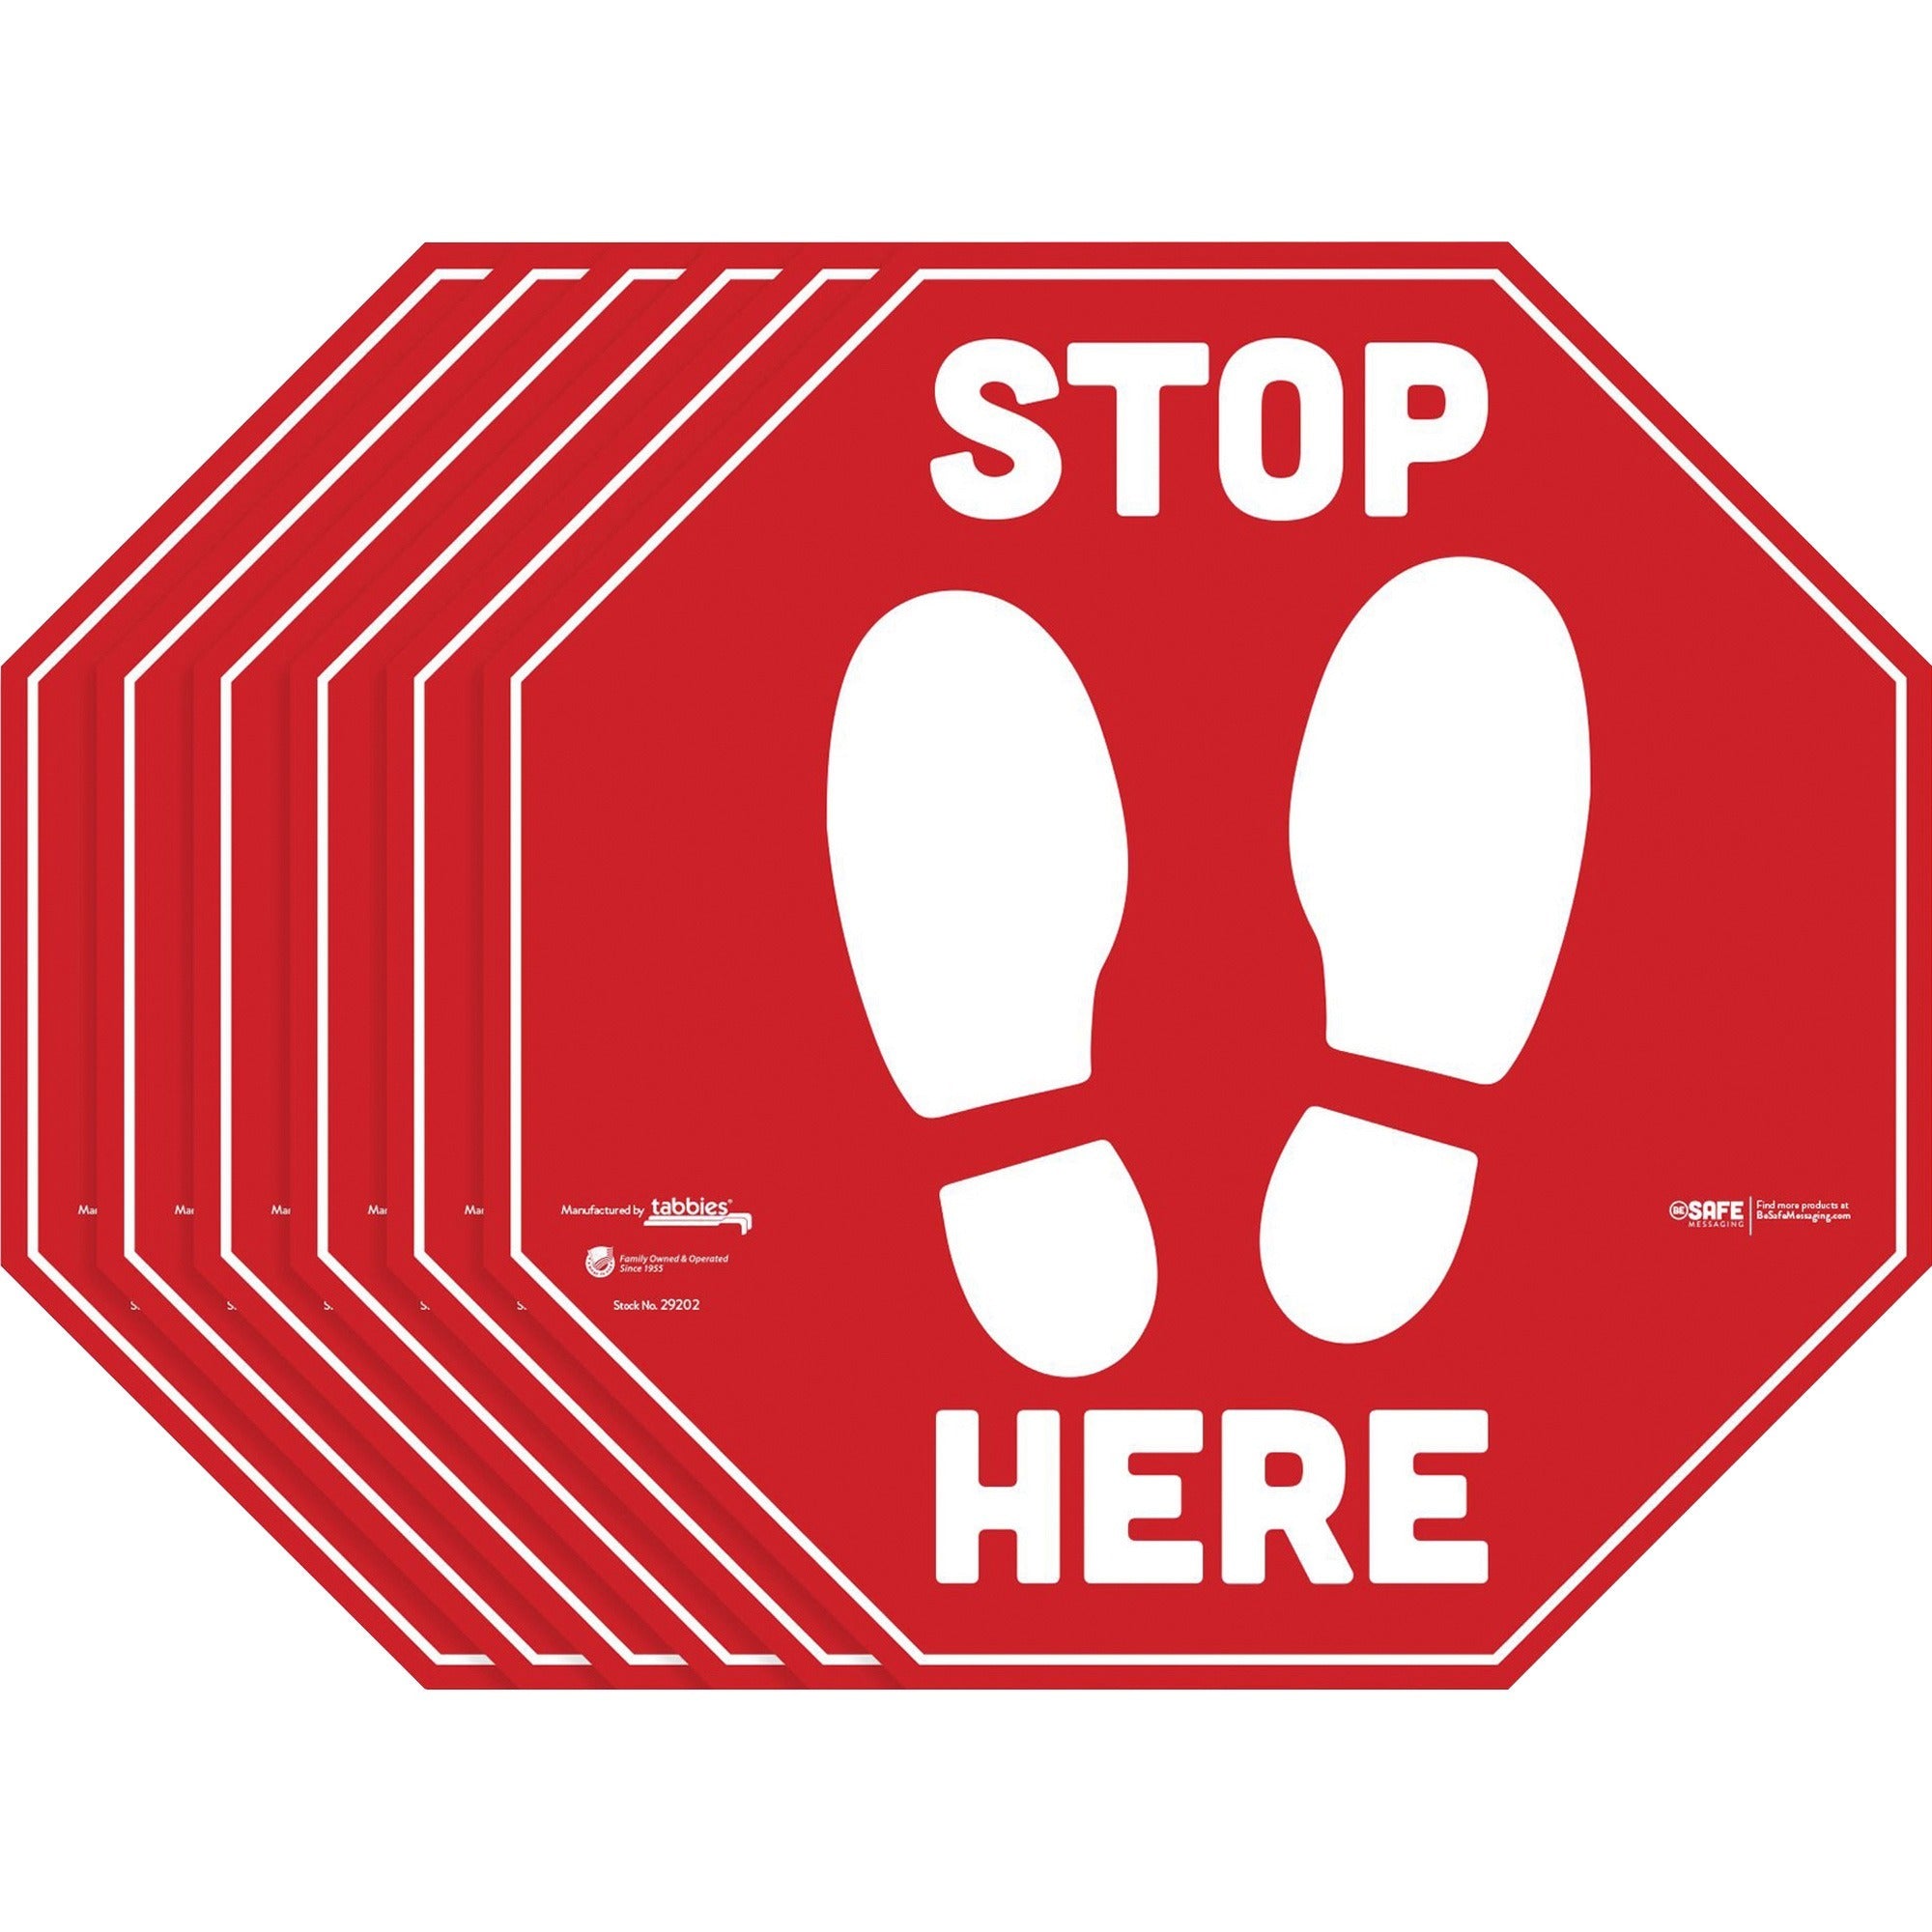 tabbies-besafe-stop-here-messaging-carpet-decals-6-pack-stop-here-print-message-12-width-x-12-height-square-shape-easy-readability-removable-pressure-sensitive-adhesive-adjustable-non-slip-acrylic-vinyl-red-white_tab29202 - 1